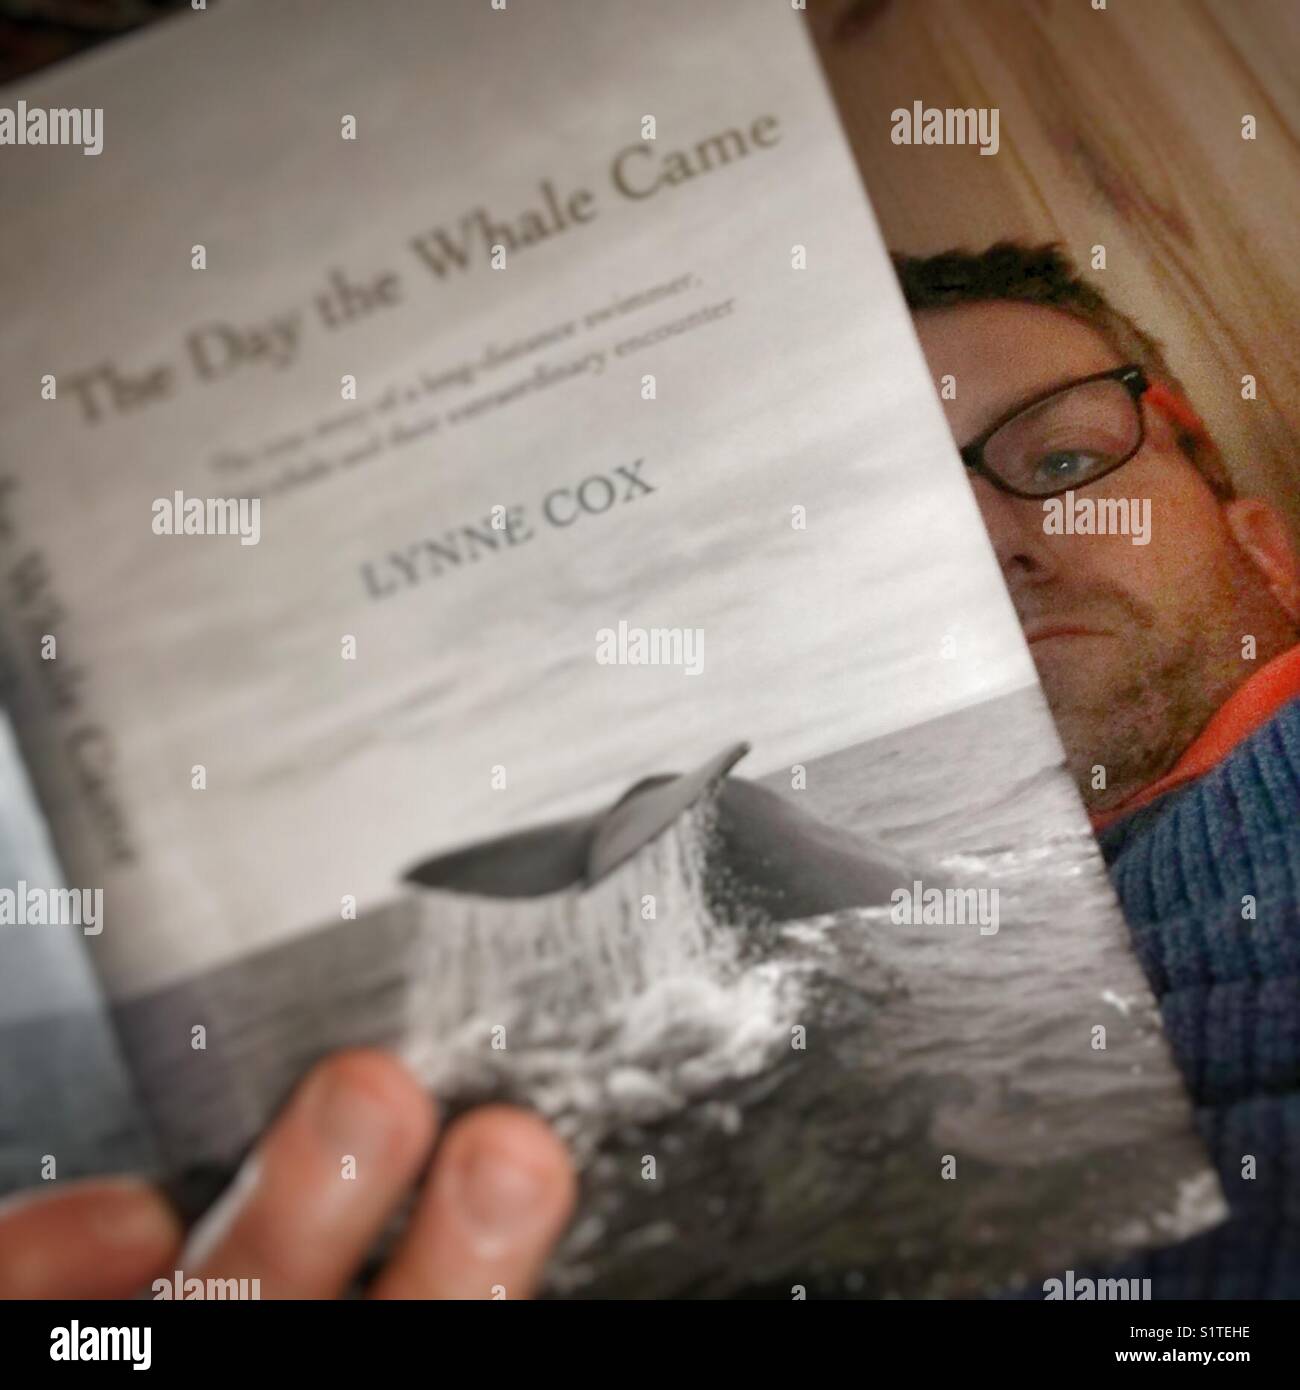 Selfie reading a book with a foto on the cover that I fotographed myself. Stock Photo